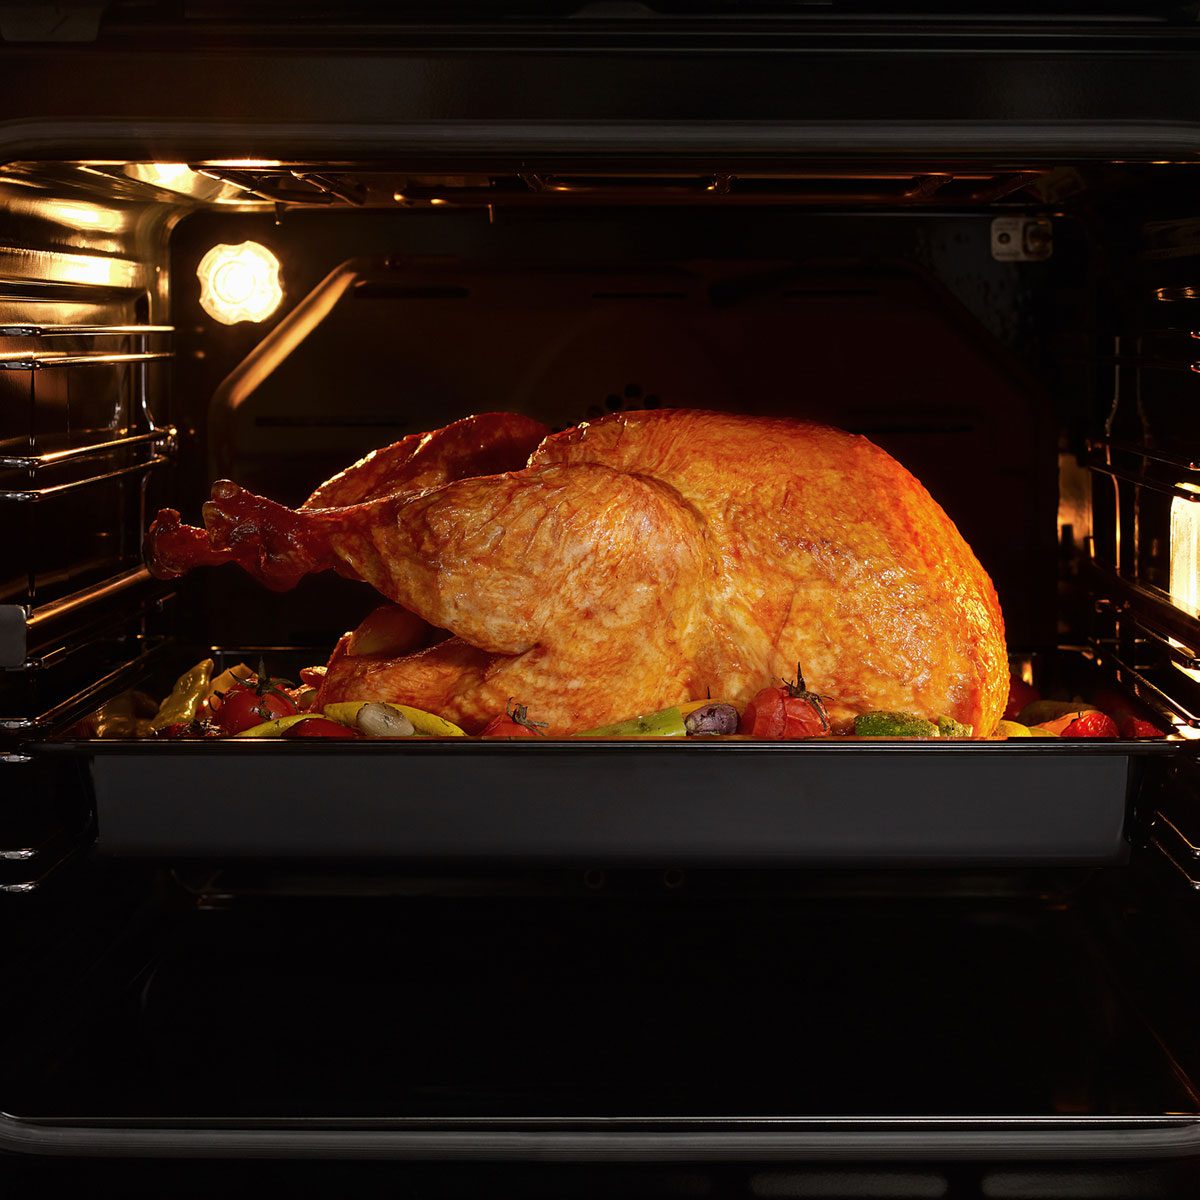 Turkey cooking in the oven